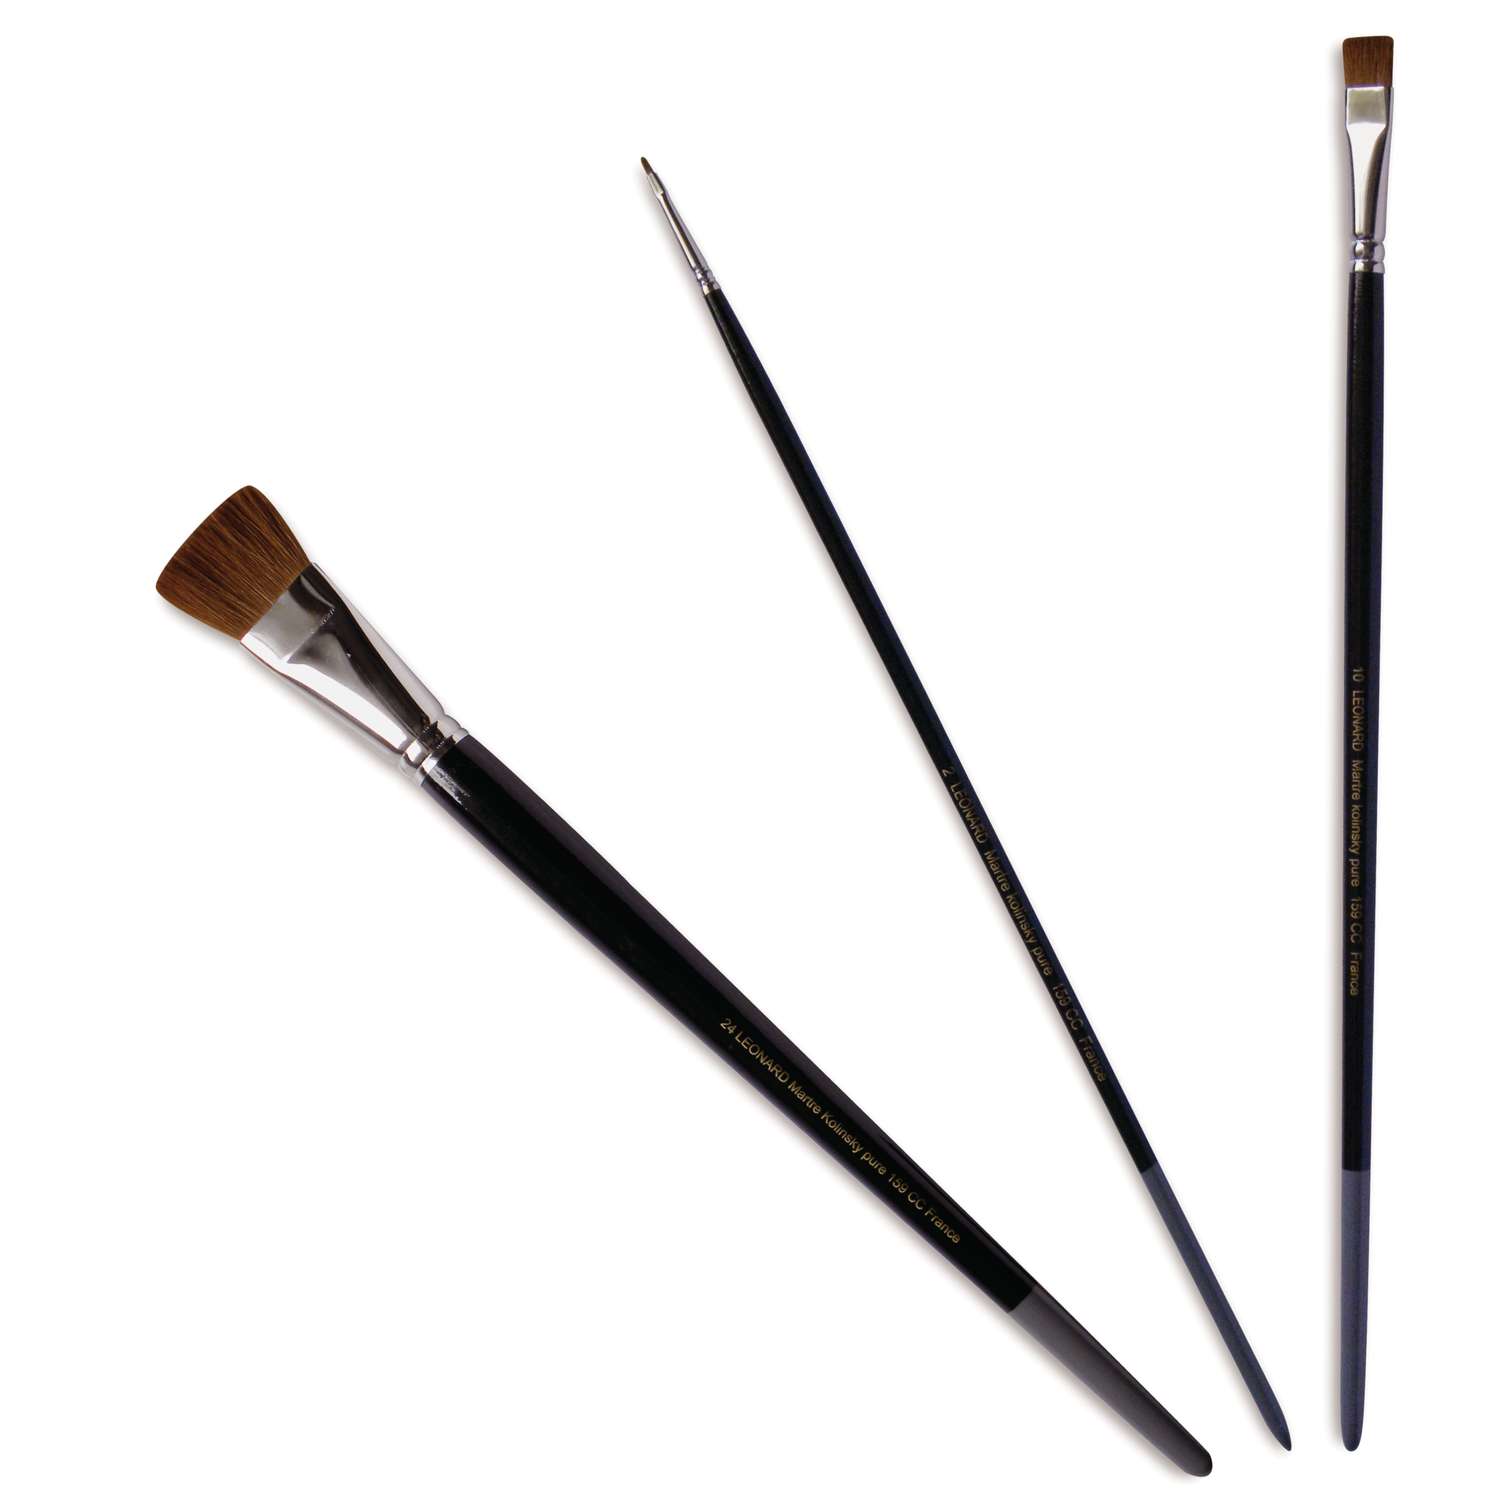 A Quick Update on Kolinsky Sable Brushes